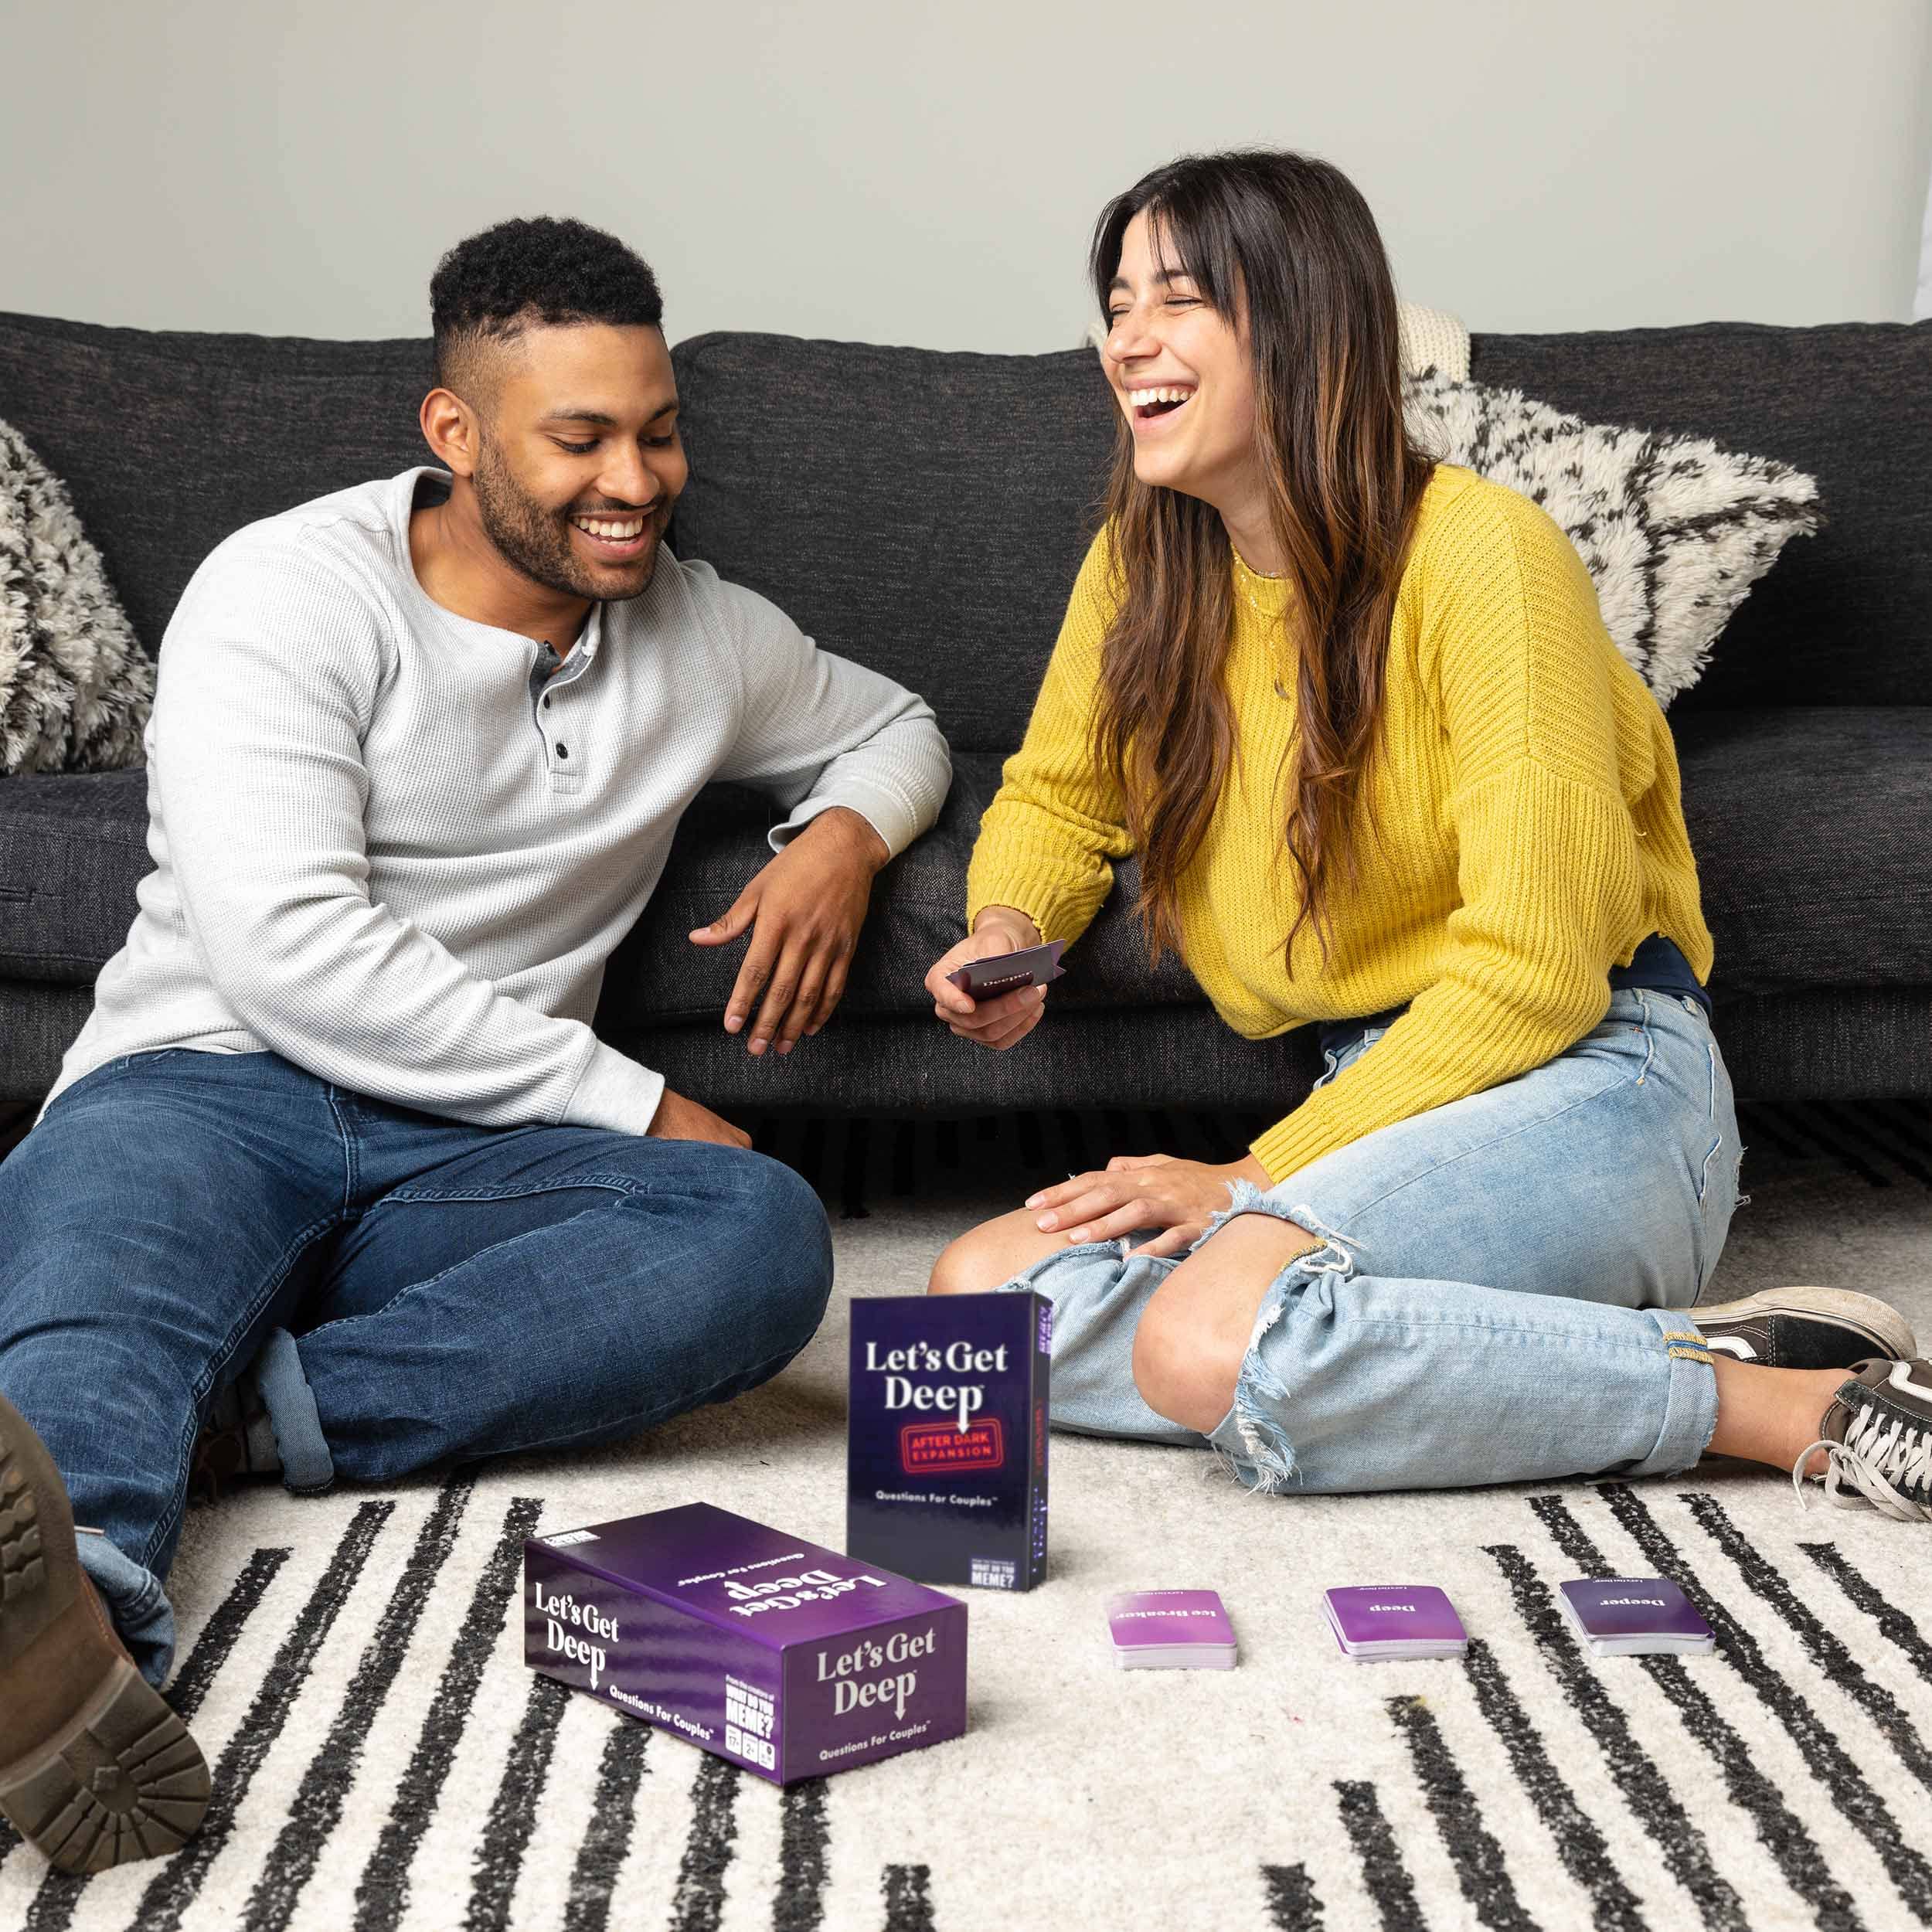 WHAT DO YOU MEME? Let's Get Deep: After Dark Expansion Pack – Conversation Cards for Couples - Pairs with The Love Language Card Game Let's Get Deep